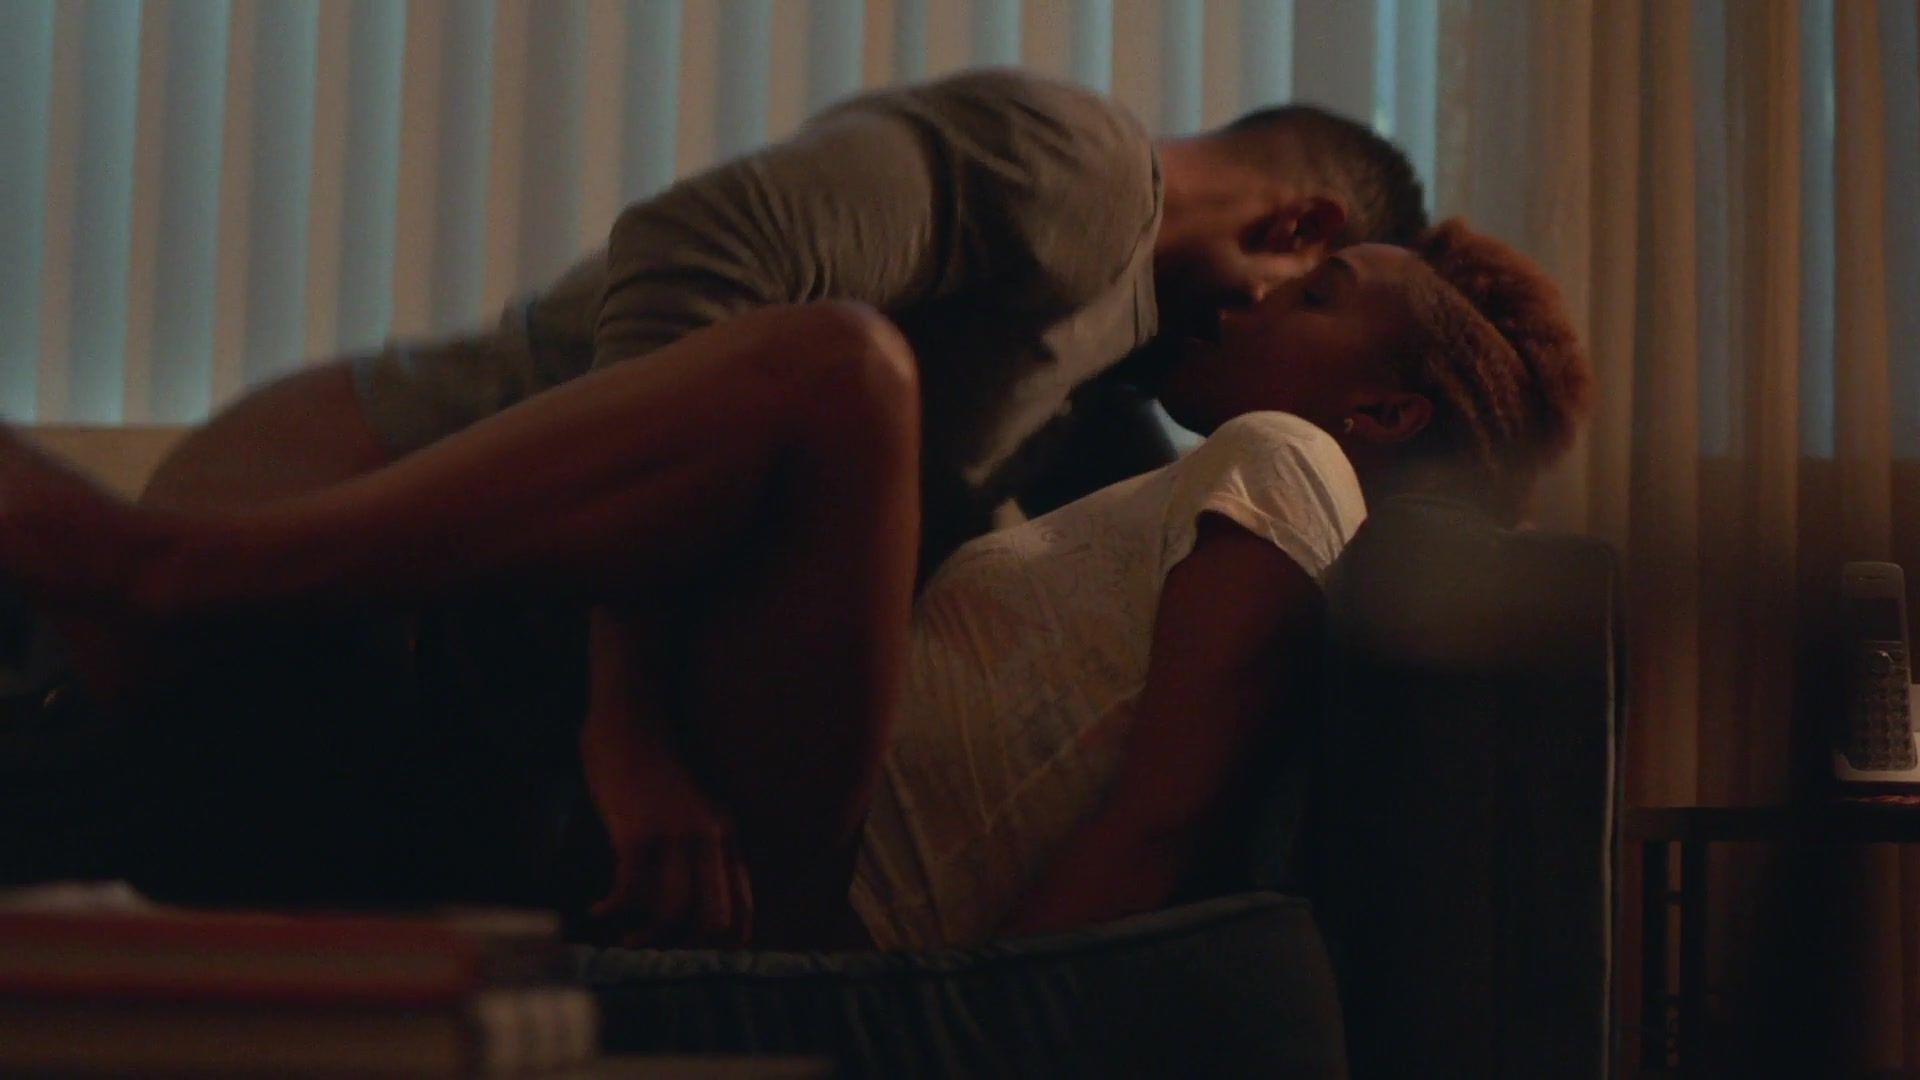 Muscular Domnique Perry naked, Issa Rae Naked - Insecure s02e01 (2017) Climax